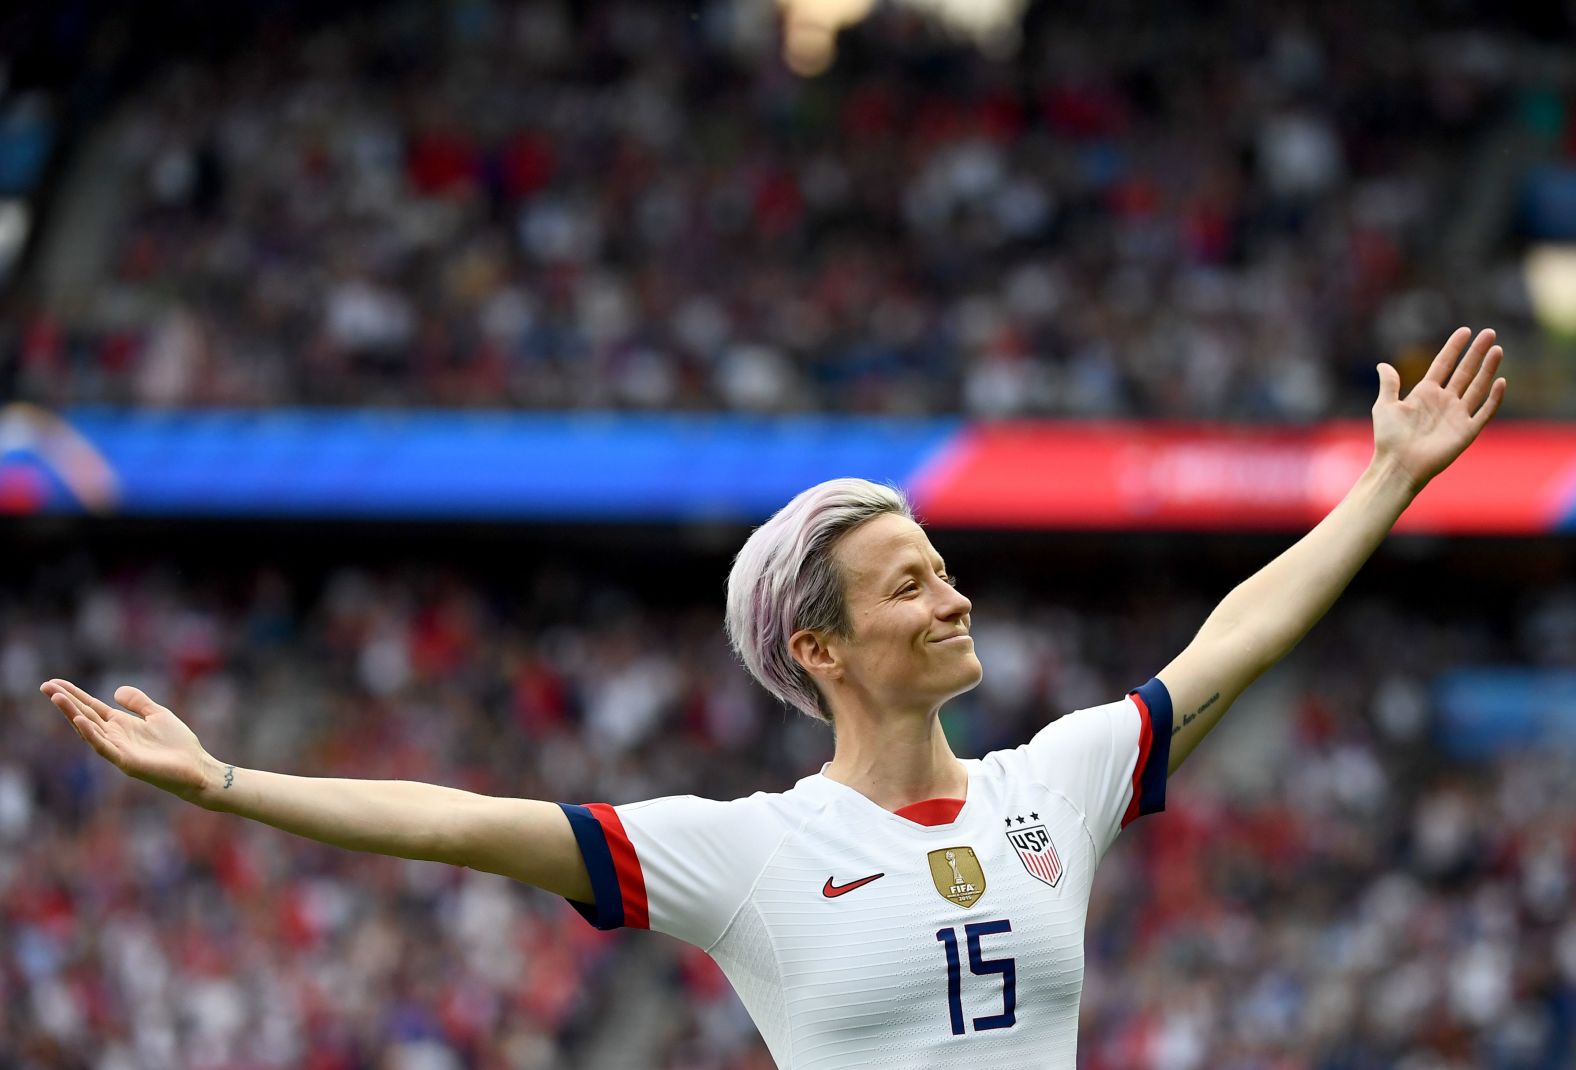 US soccer player Megan Rapinoe celebrates her first of two goals in the World Cup quarterfinal win over France in June 2019. Rapinoe scored a tournament-high six goals as the Americans <a href="https://www.cnn.com/2019/07/03/football/gallery/uswnt-world-cup-2019/index.html" target="_blank">won their second straight World Cup title.</a>